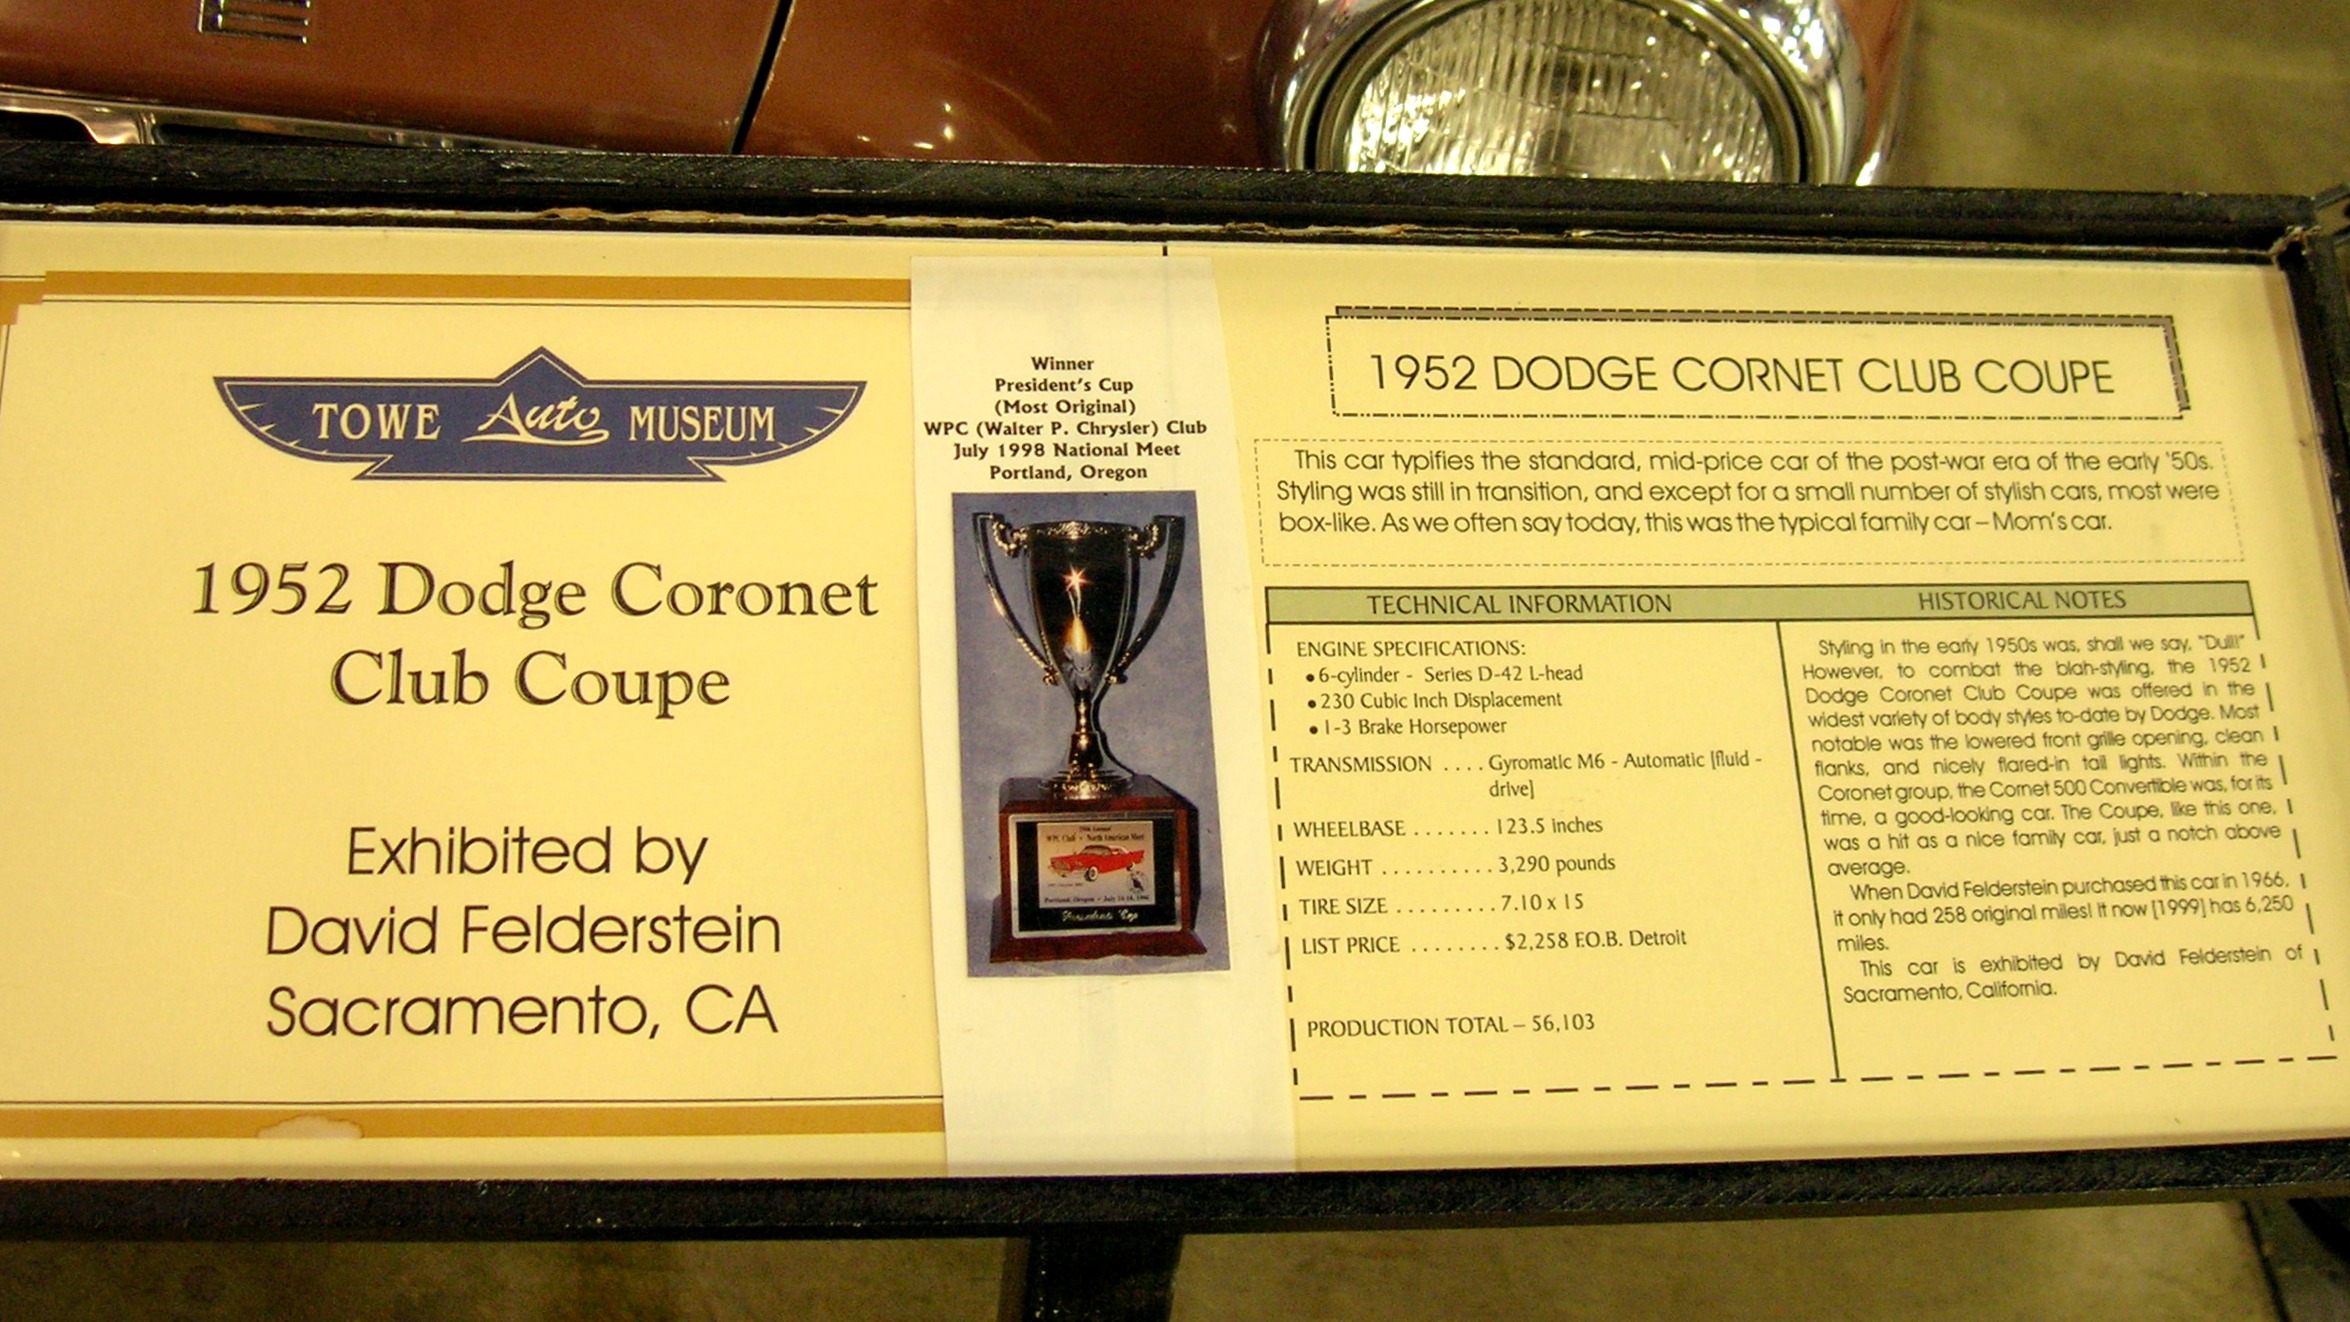 1952 Dodge Coronet Club Coupe Info | Flickr - Photo Sharing!